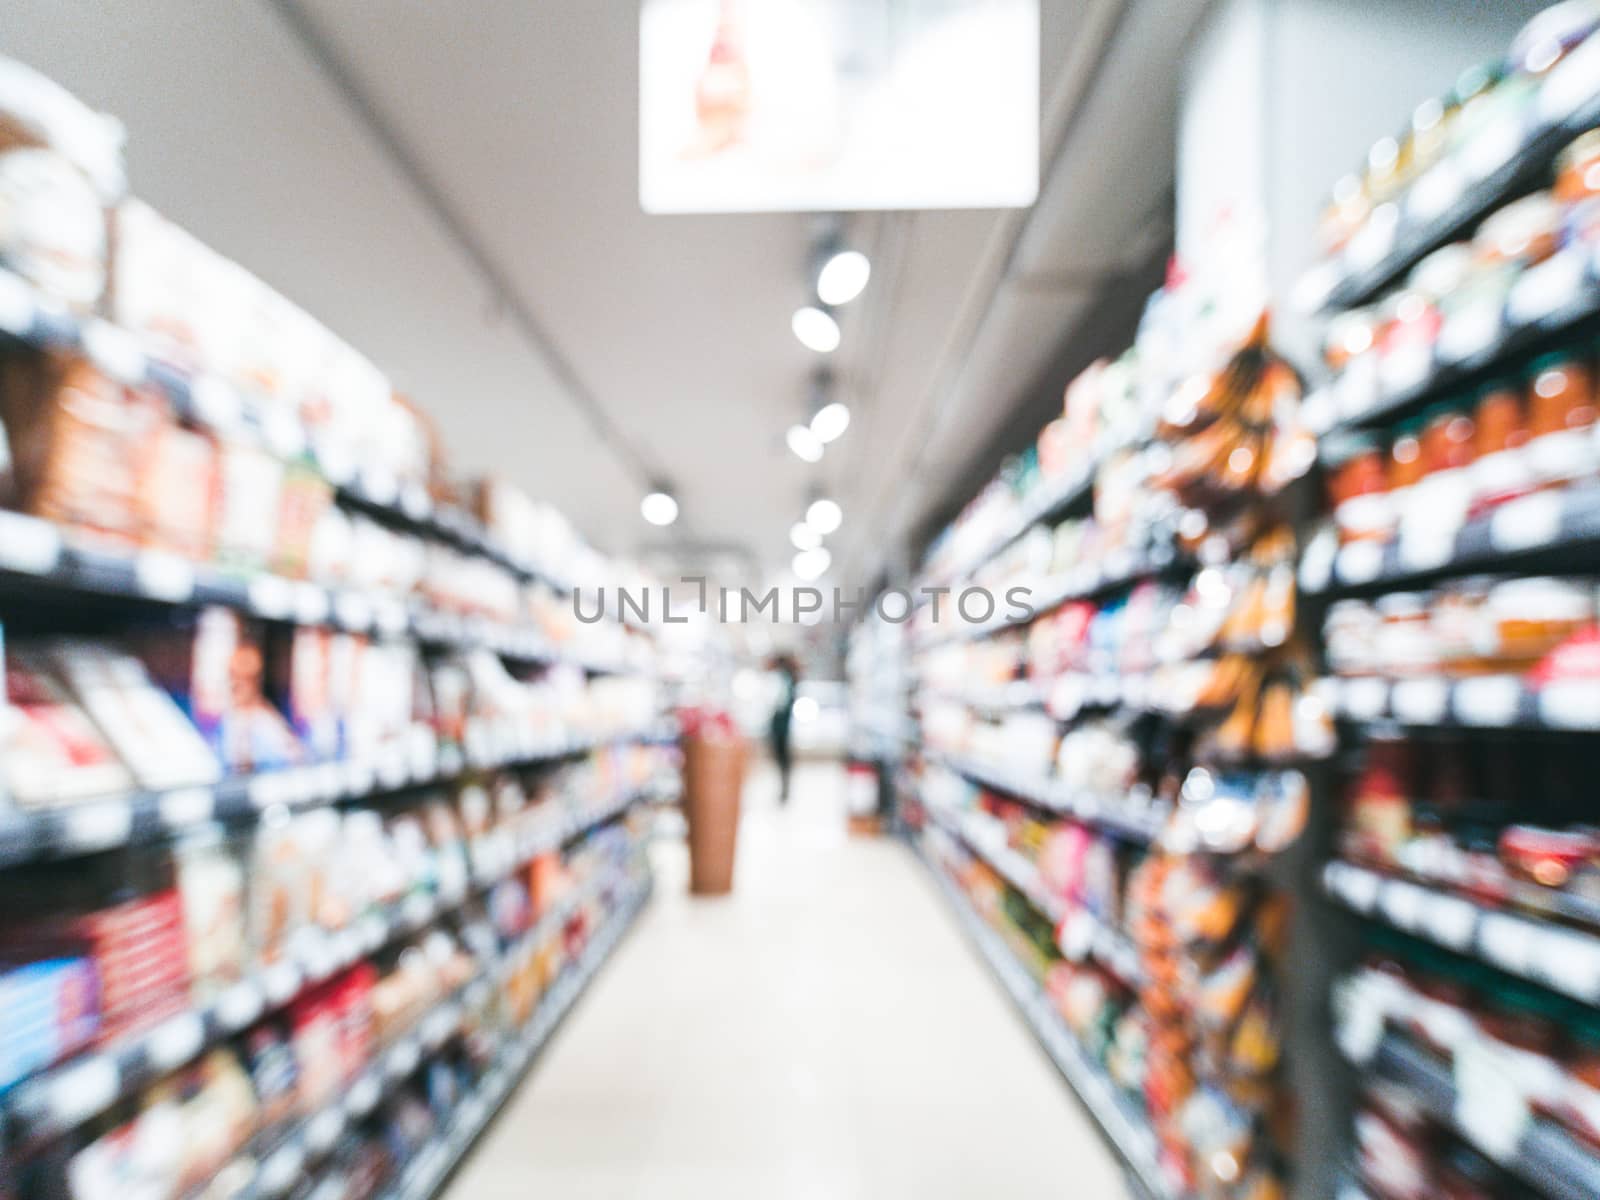 Abstract blurred supermarket aisle with colorful shelves and unrecognizable customers as background